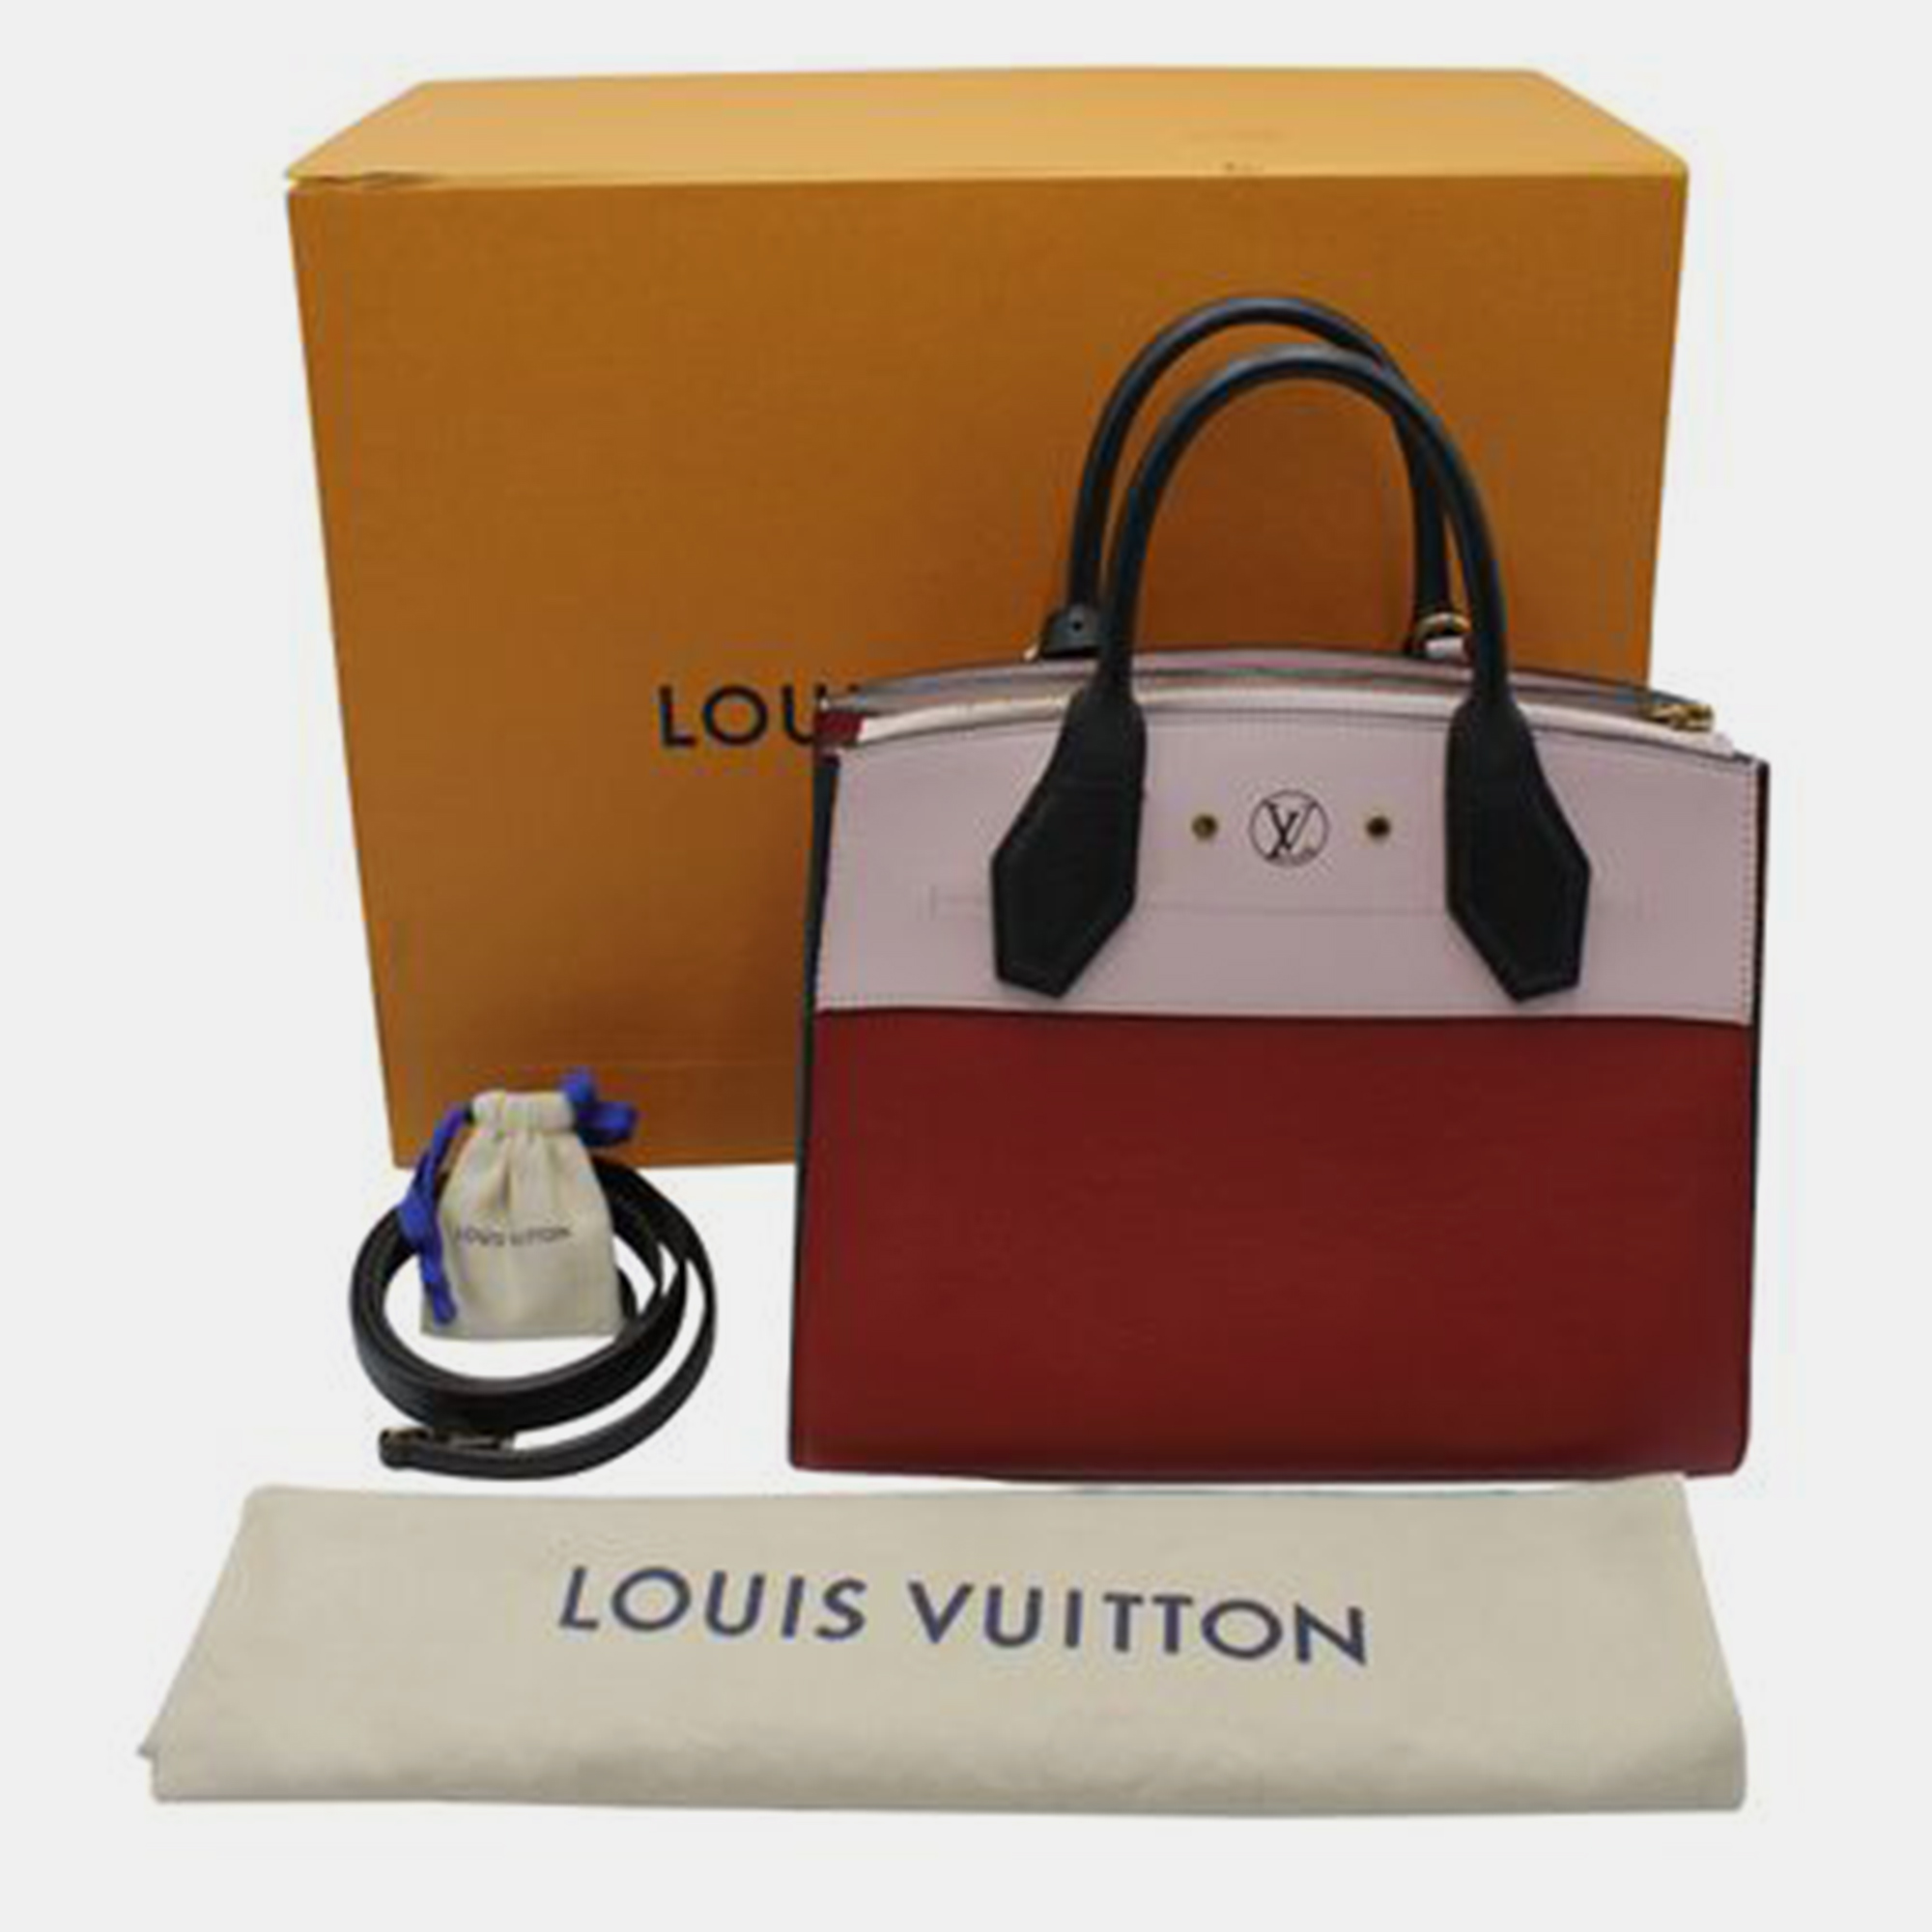 LOUIS VUITTON Red And Pale Pink City Steamer Hand Bag 2017 HANDBAGS